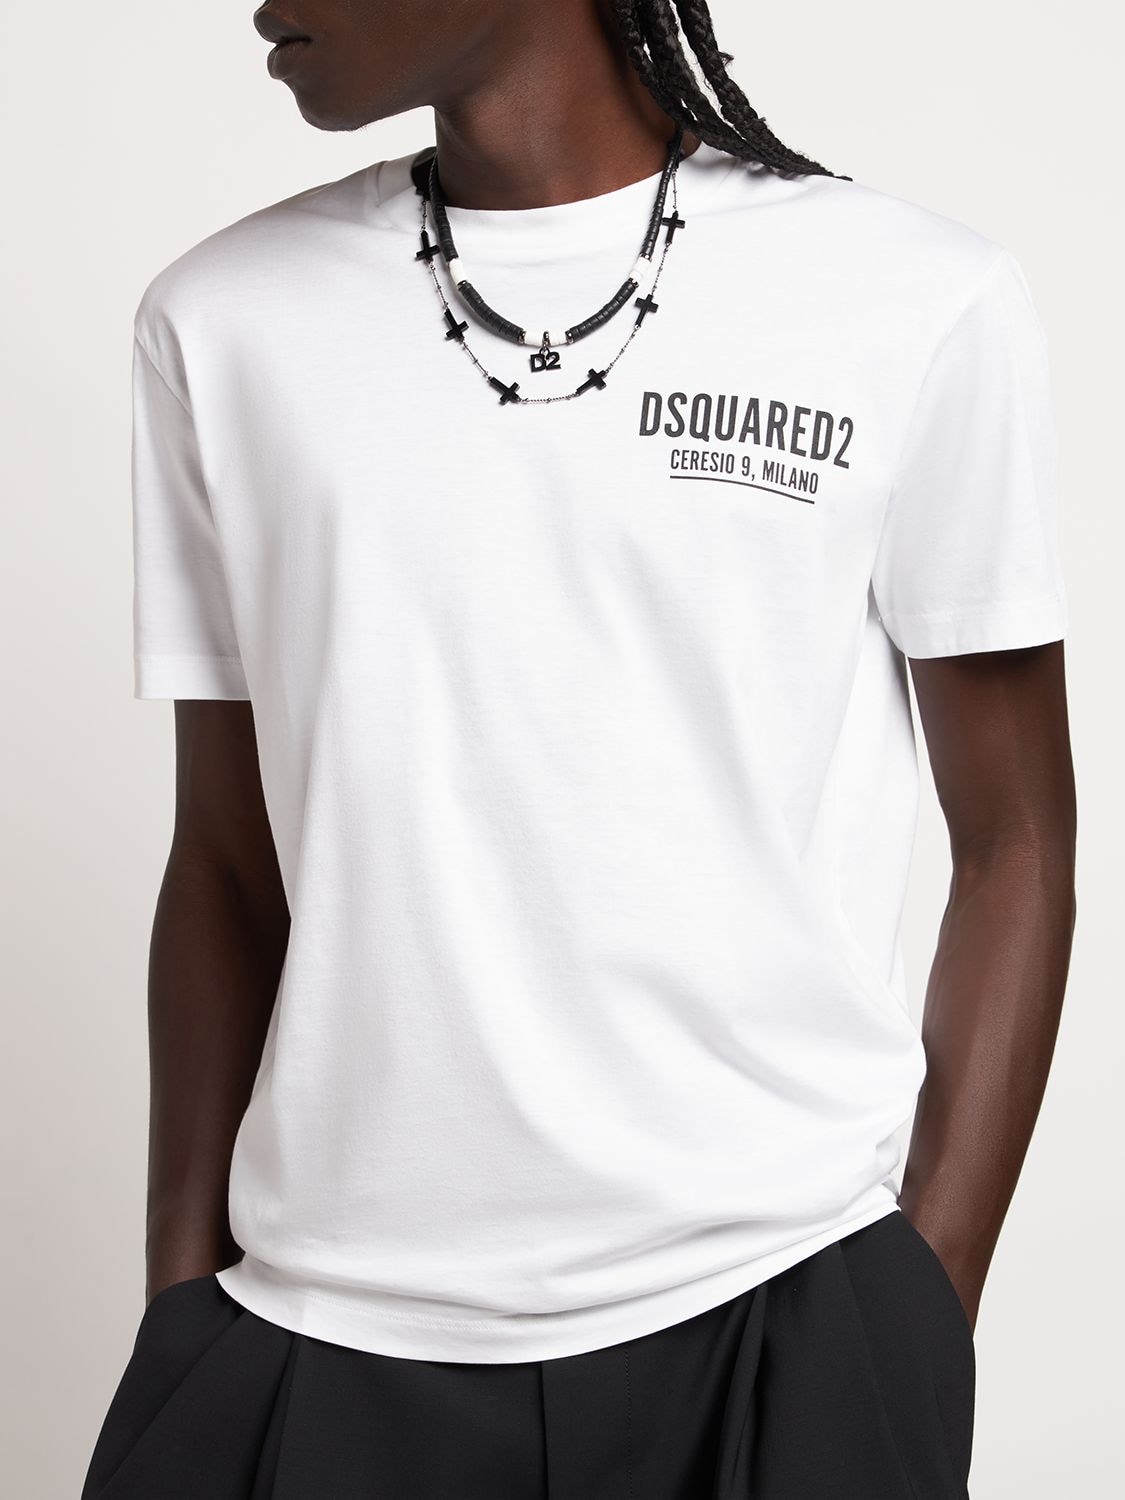 Shop Dsquared2 Ceresio 9 Cotton Jersey T-shirt In White